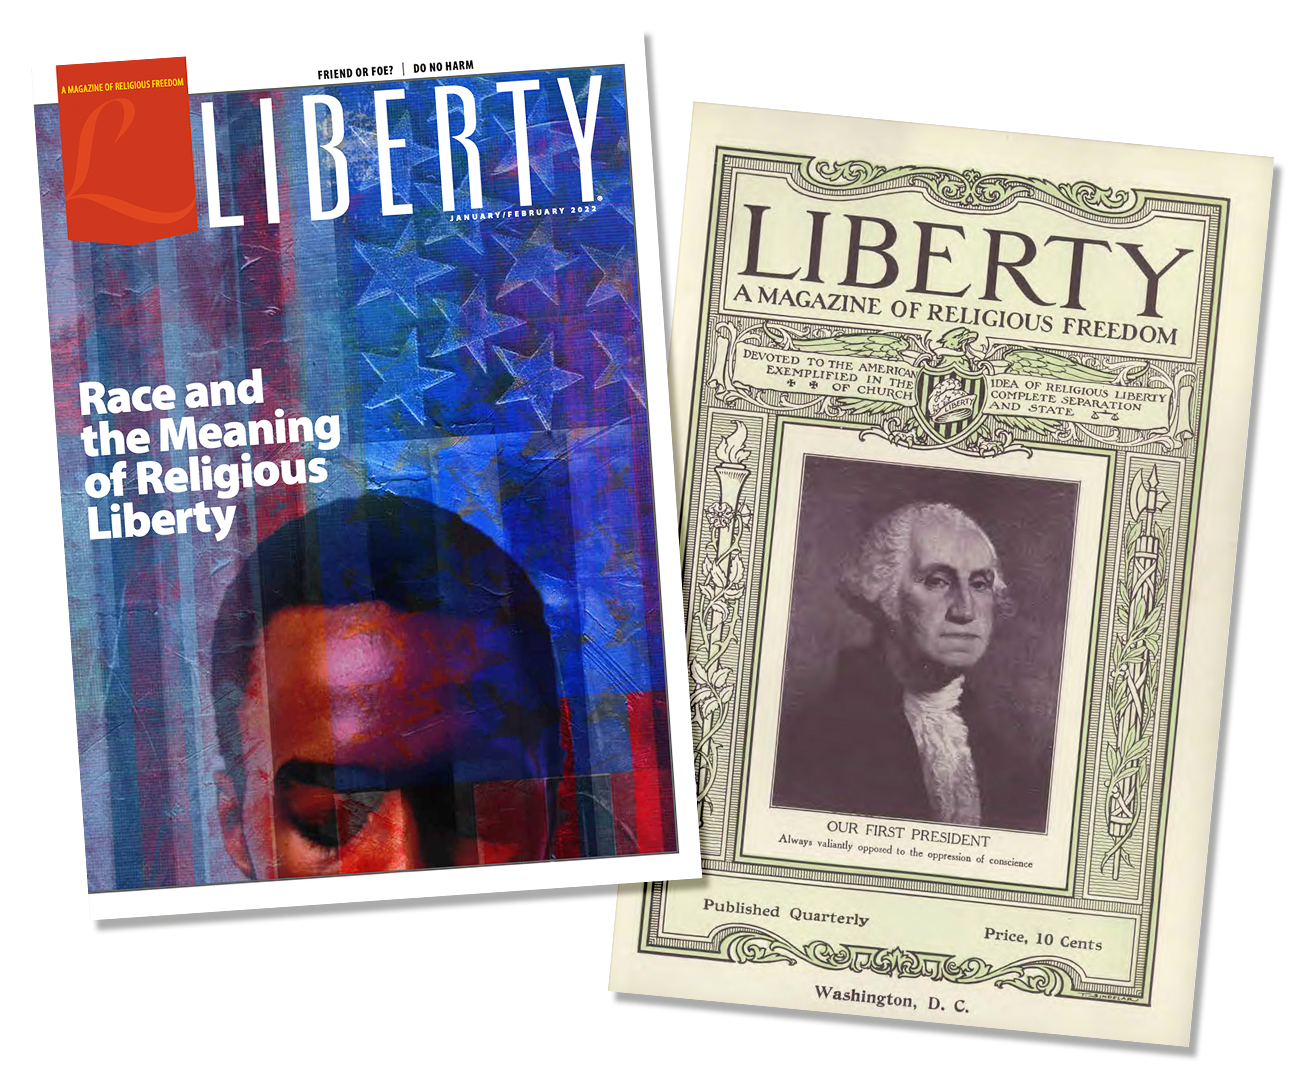 Libery covers, historical events